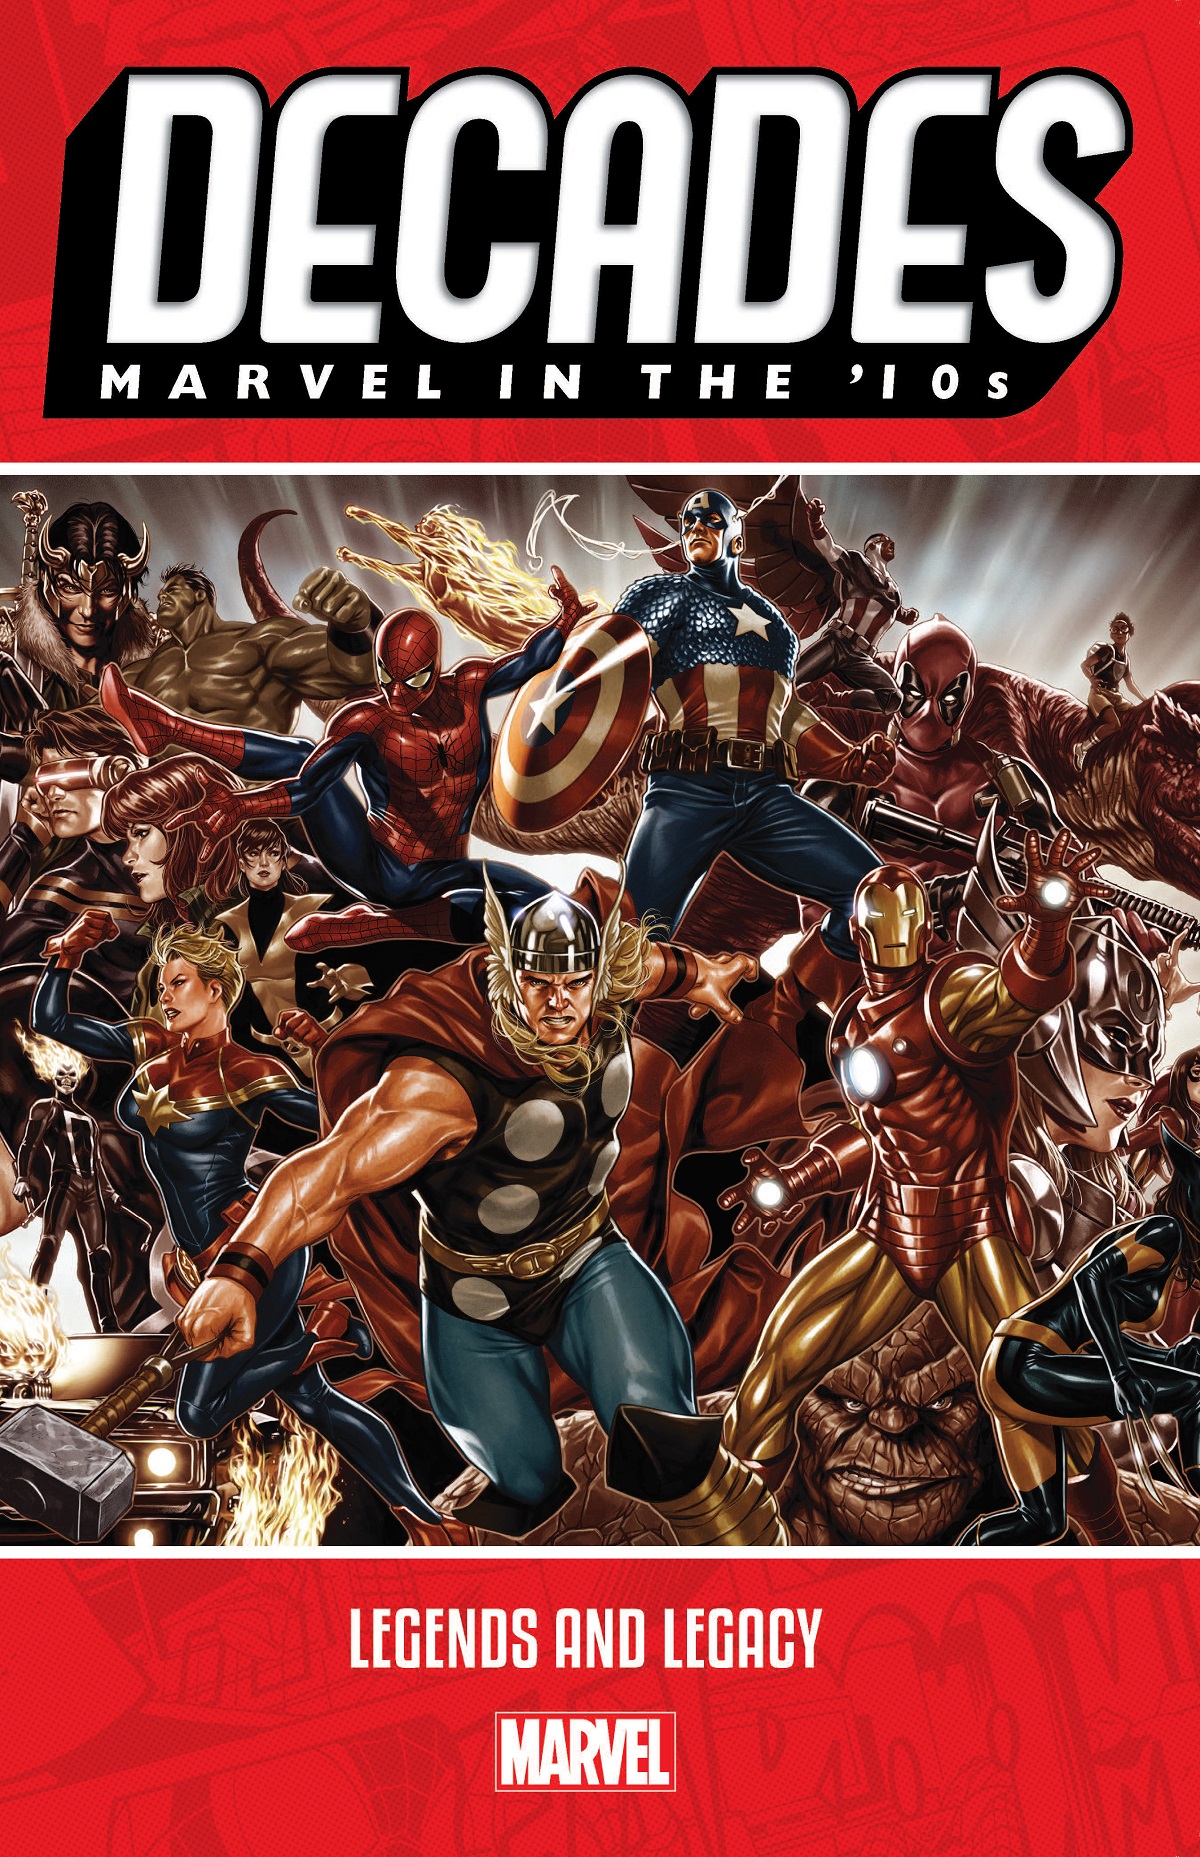 Decades: Marvel In The '10s - Legends And Legacy (Trade Paperback)